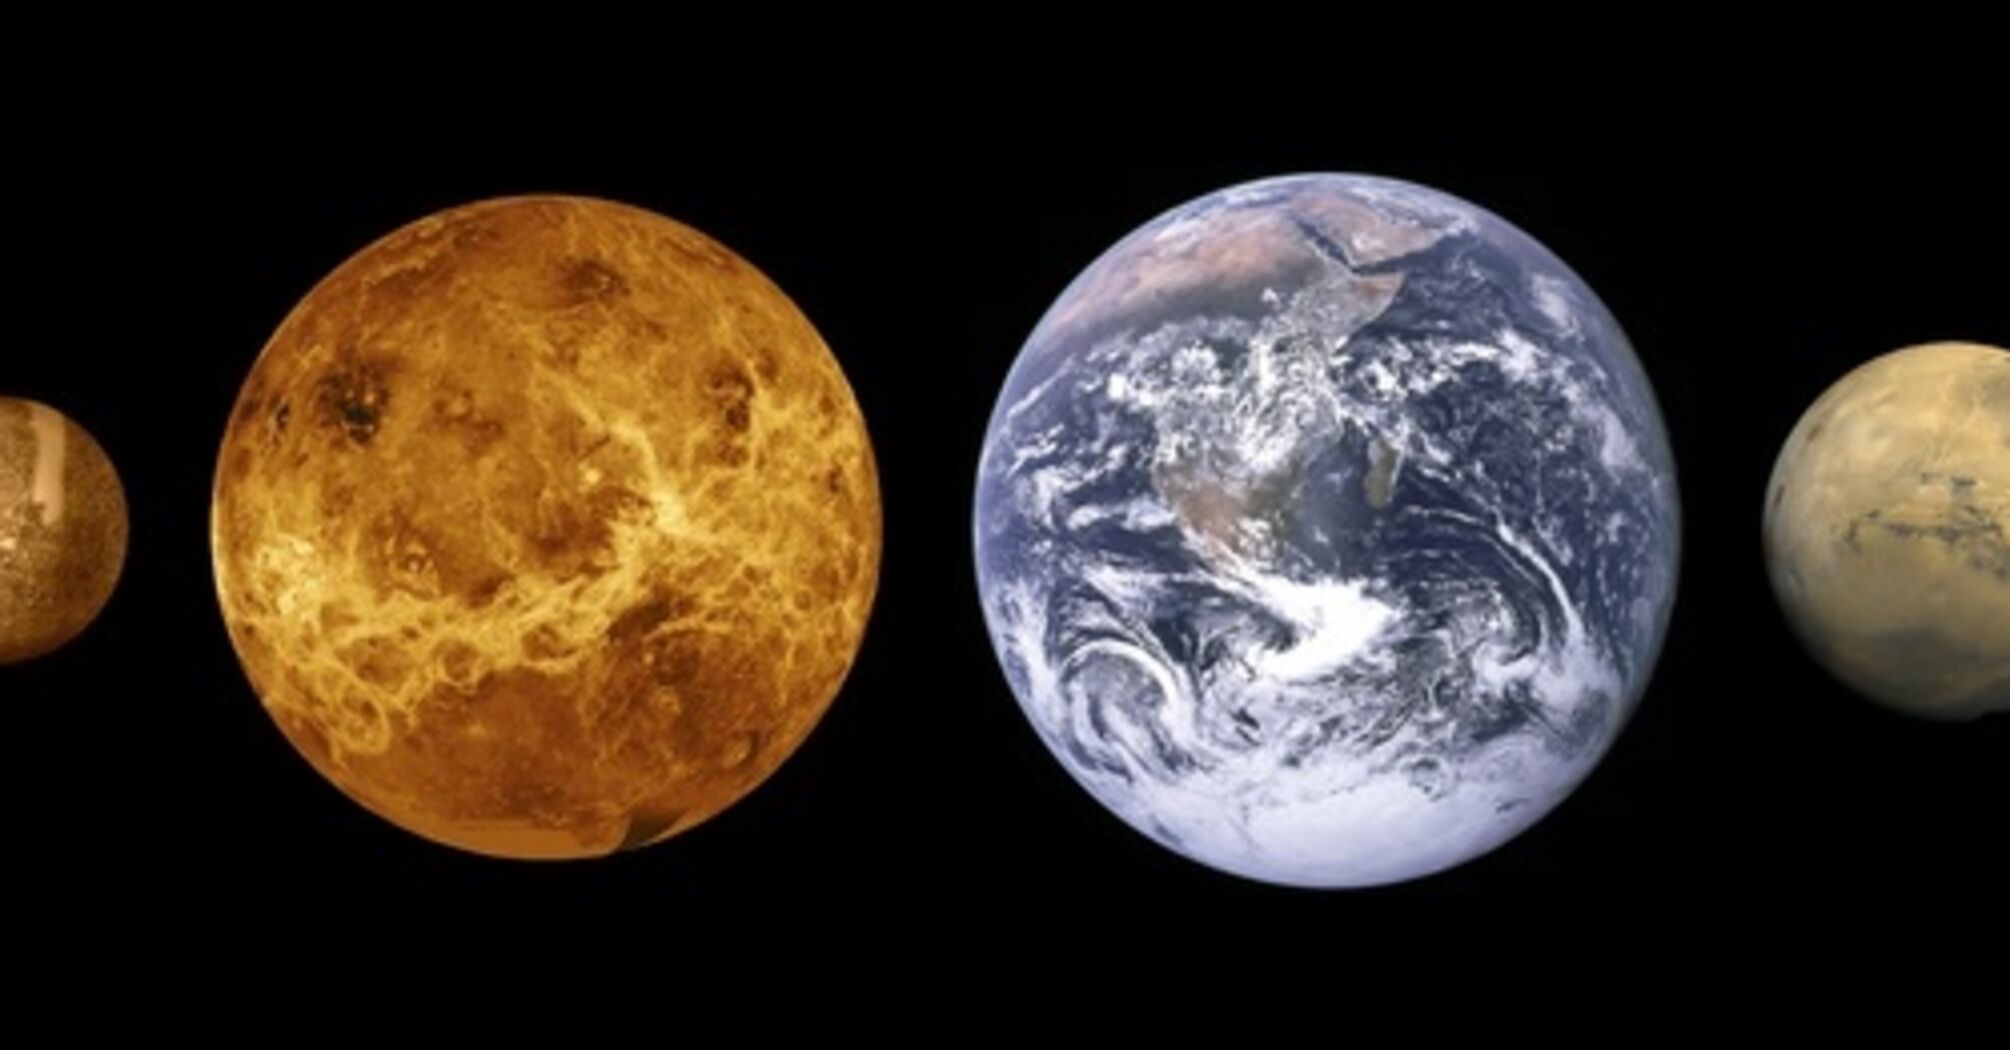 Mercury and Venus disappear, and humanity moves to other planets